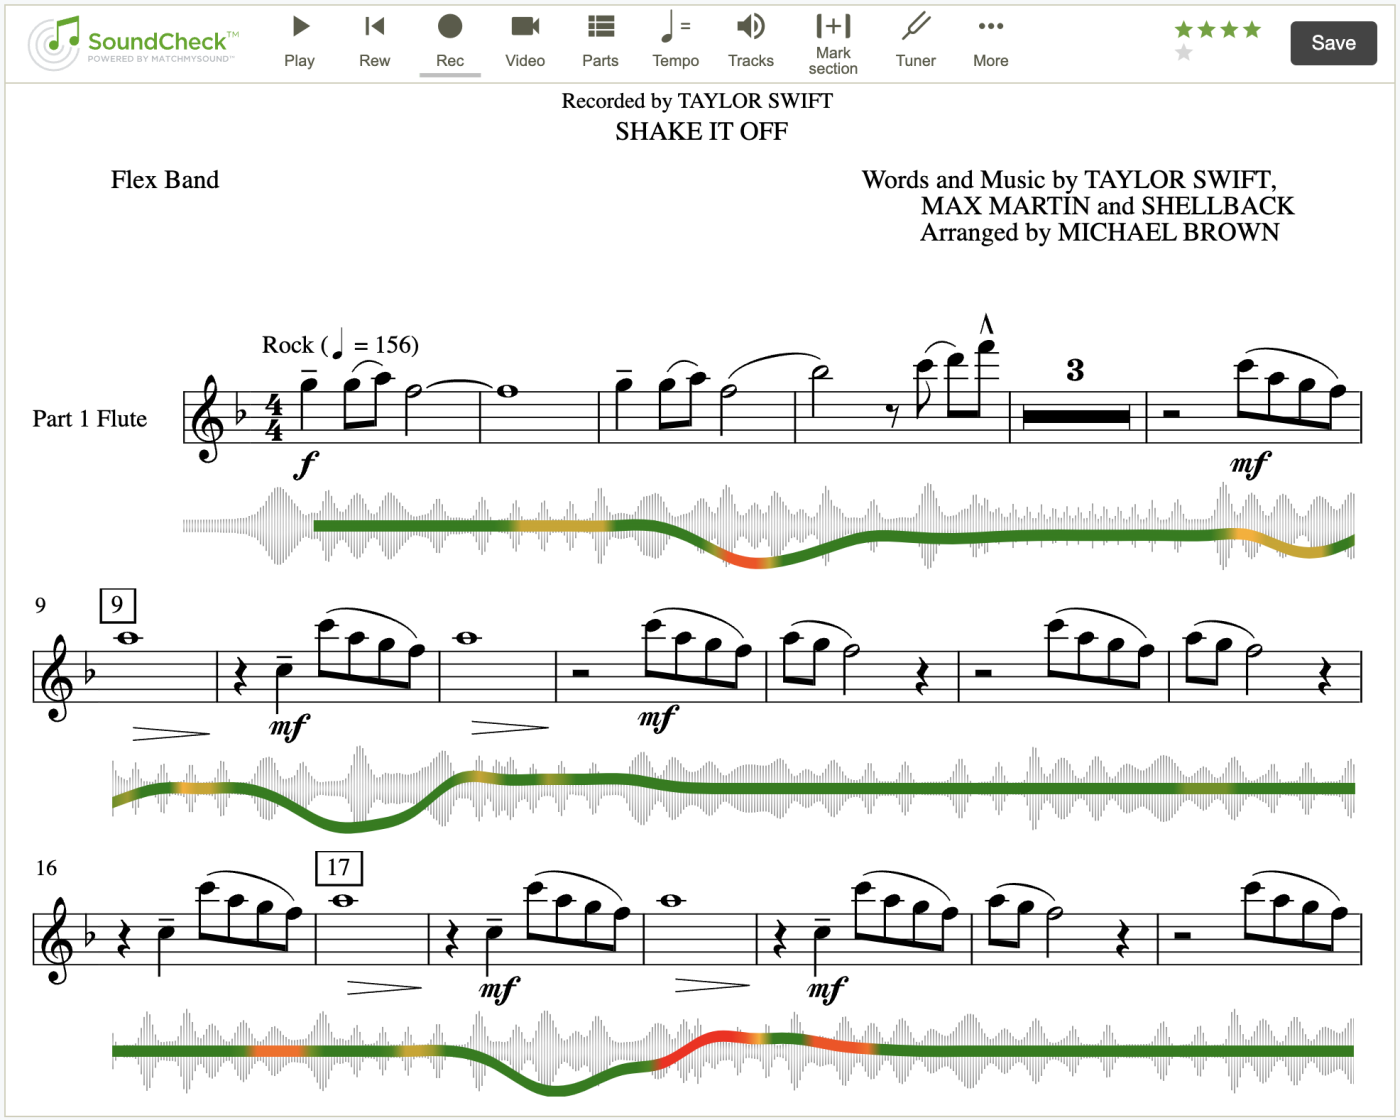 "Shake It Off" by Taylor Swift sheet music displayed in SoundCheck assessment software